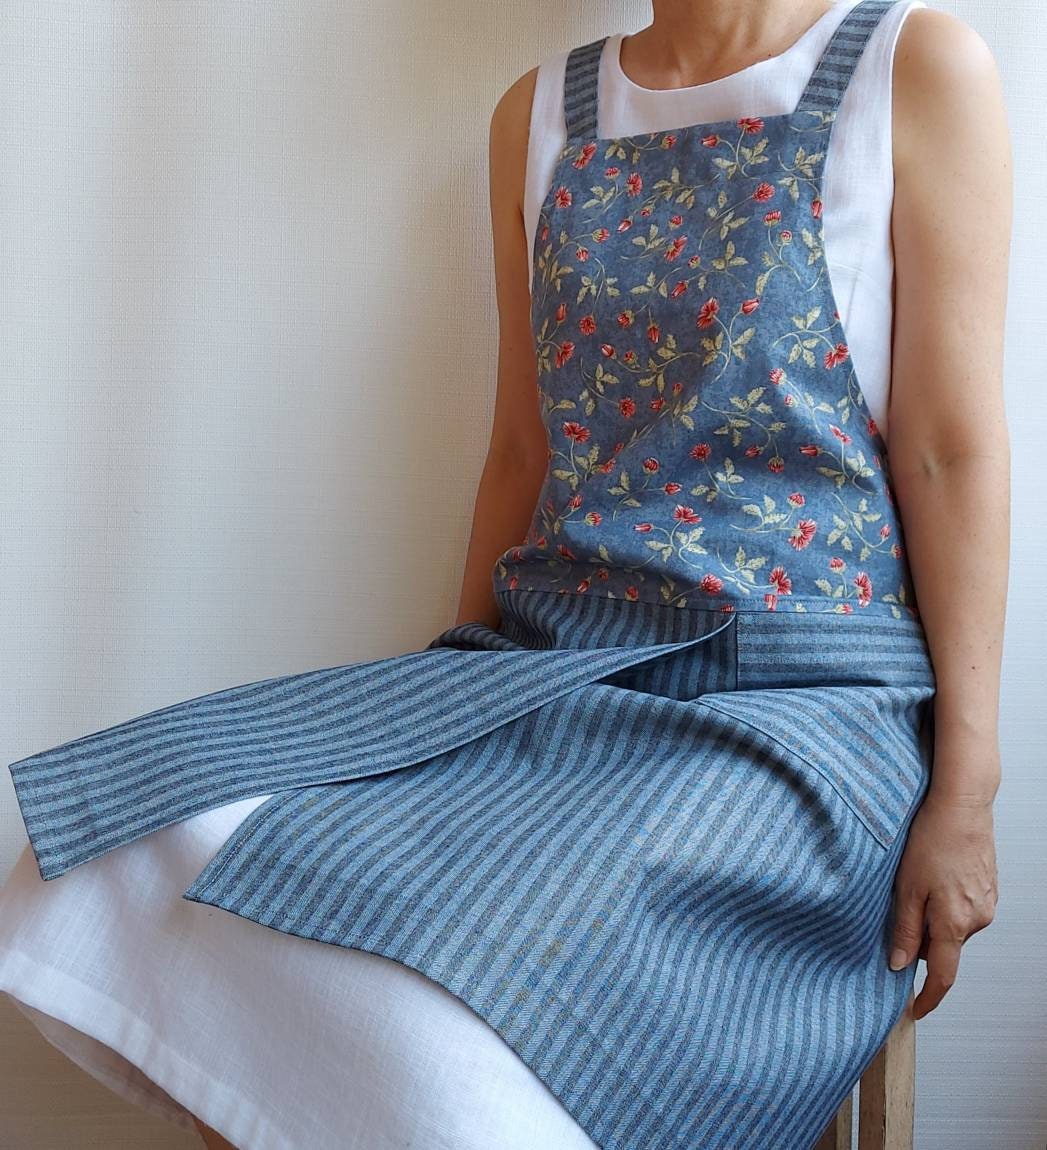 Split leg Pottery Apron, Crafts Apron, Kitchen Apron, with pockets for tools